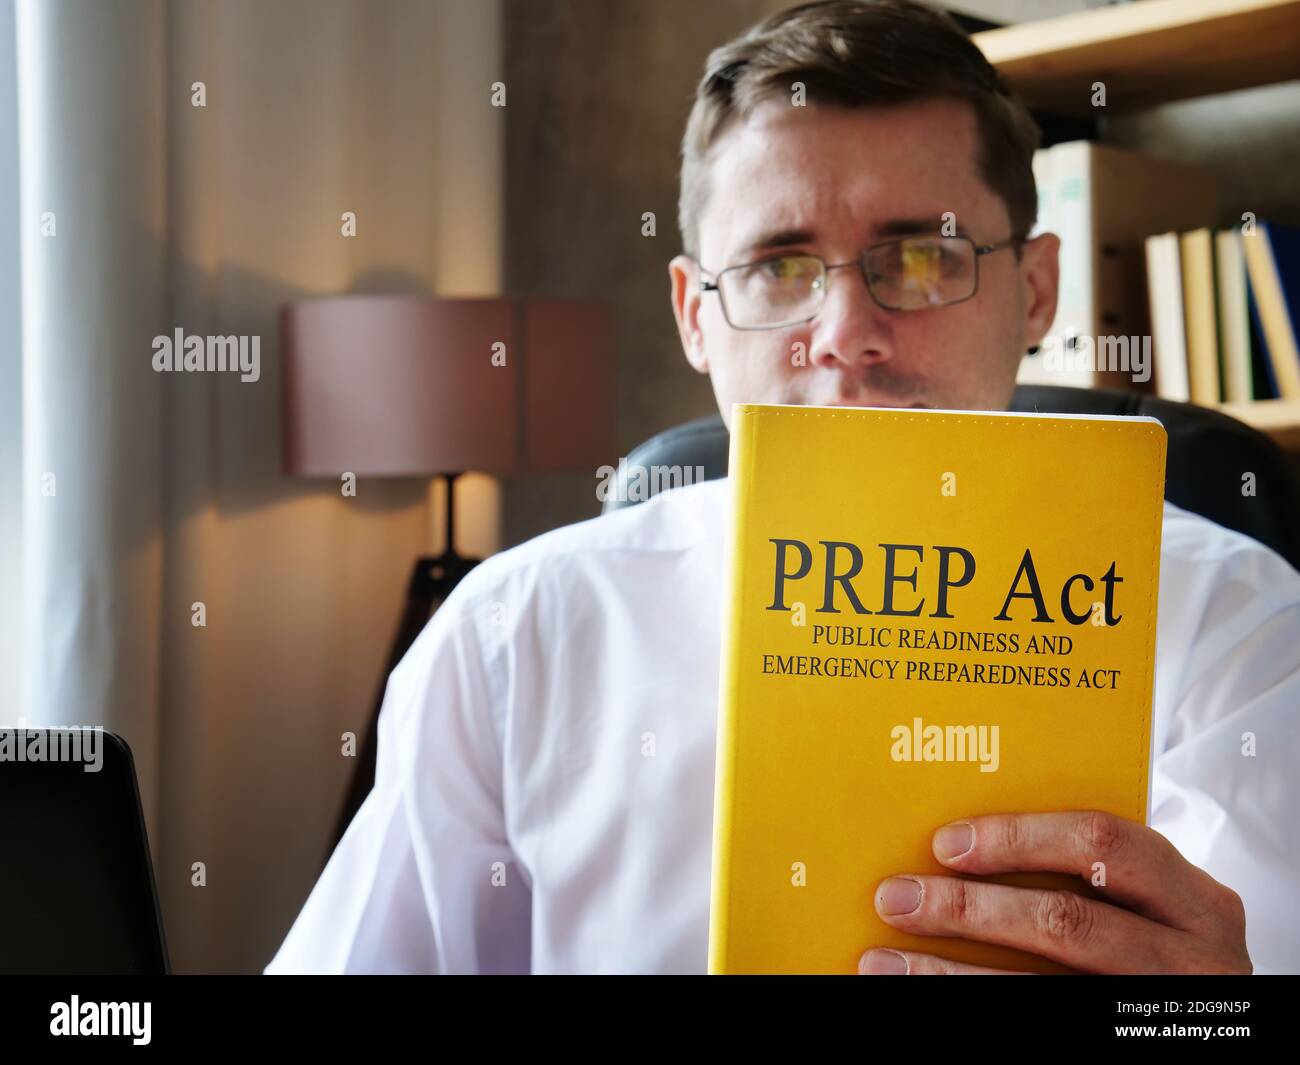 The doctor shows Public Readiness and Emergency Preparedness PREP Act book. Stock Photo